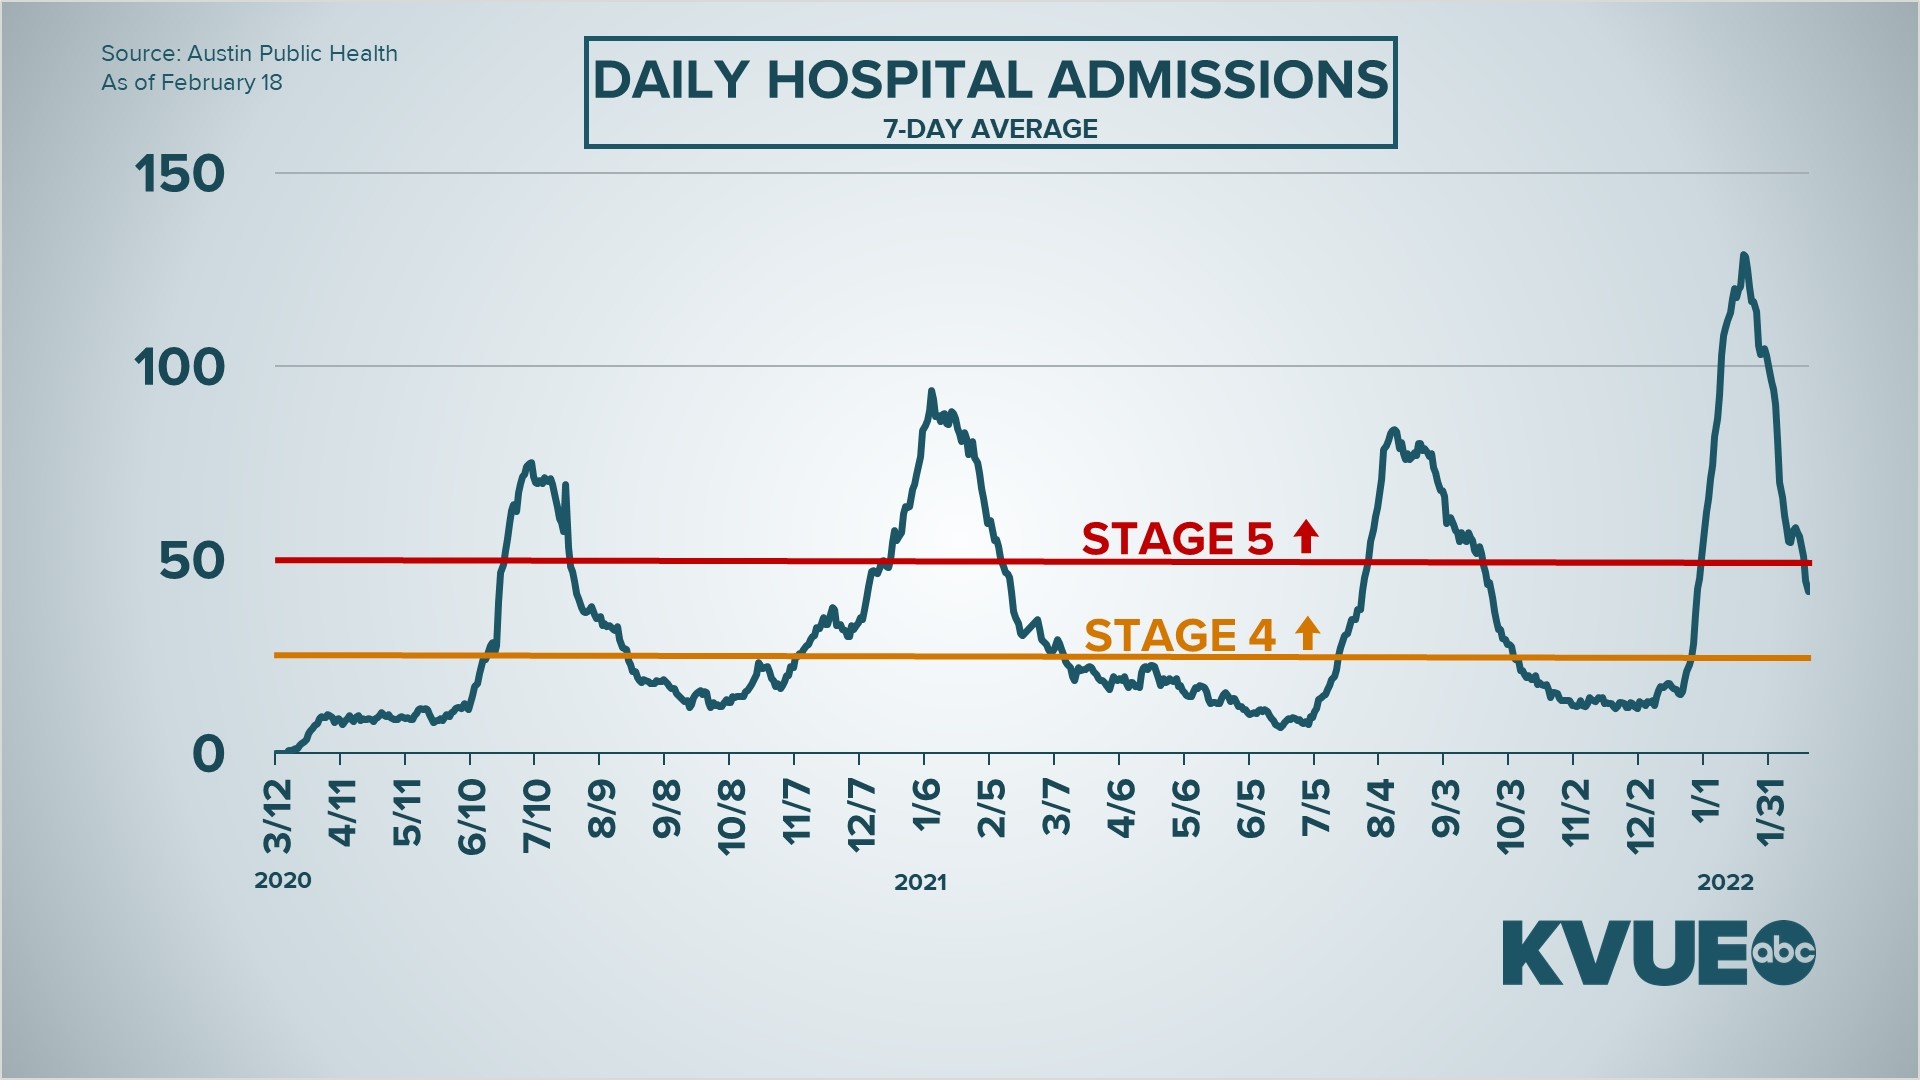 While the seven-day moving average of new hospital admissions has dropped since peaking in January, the area officially remains in Stage 5.